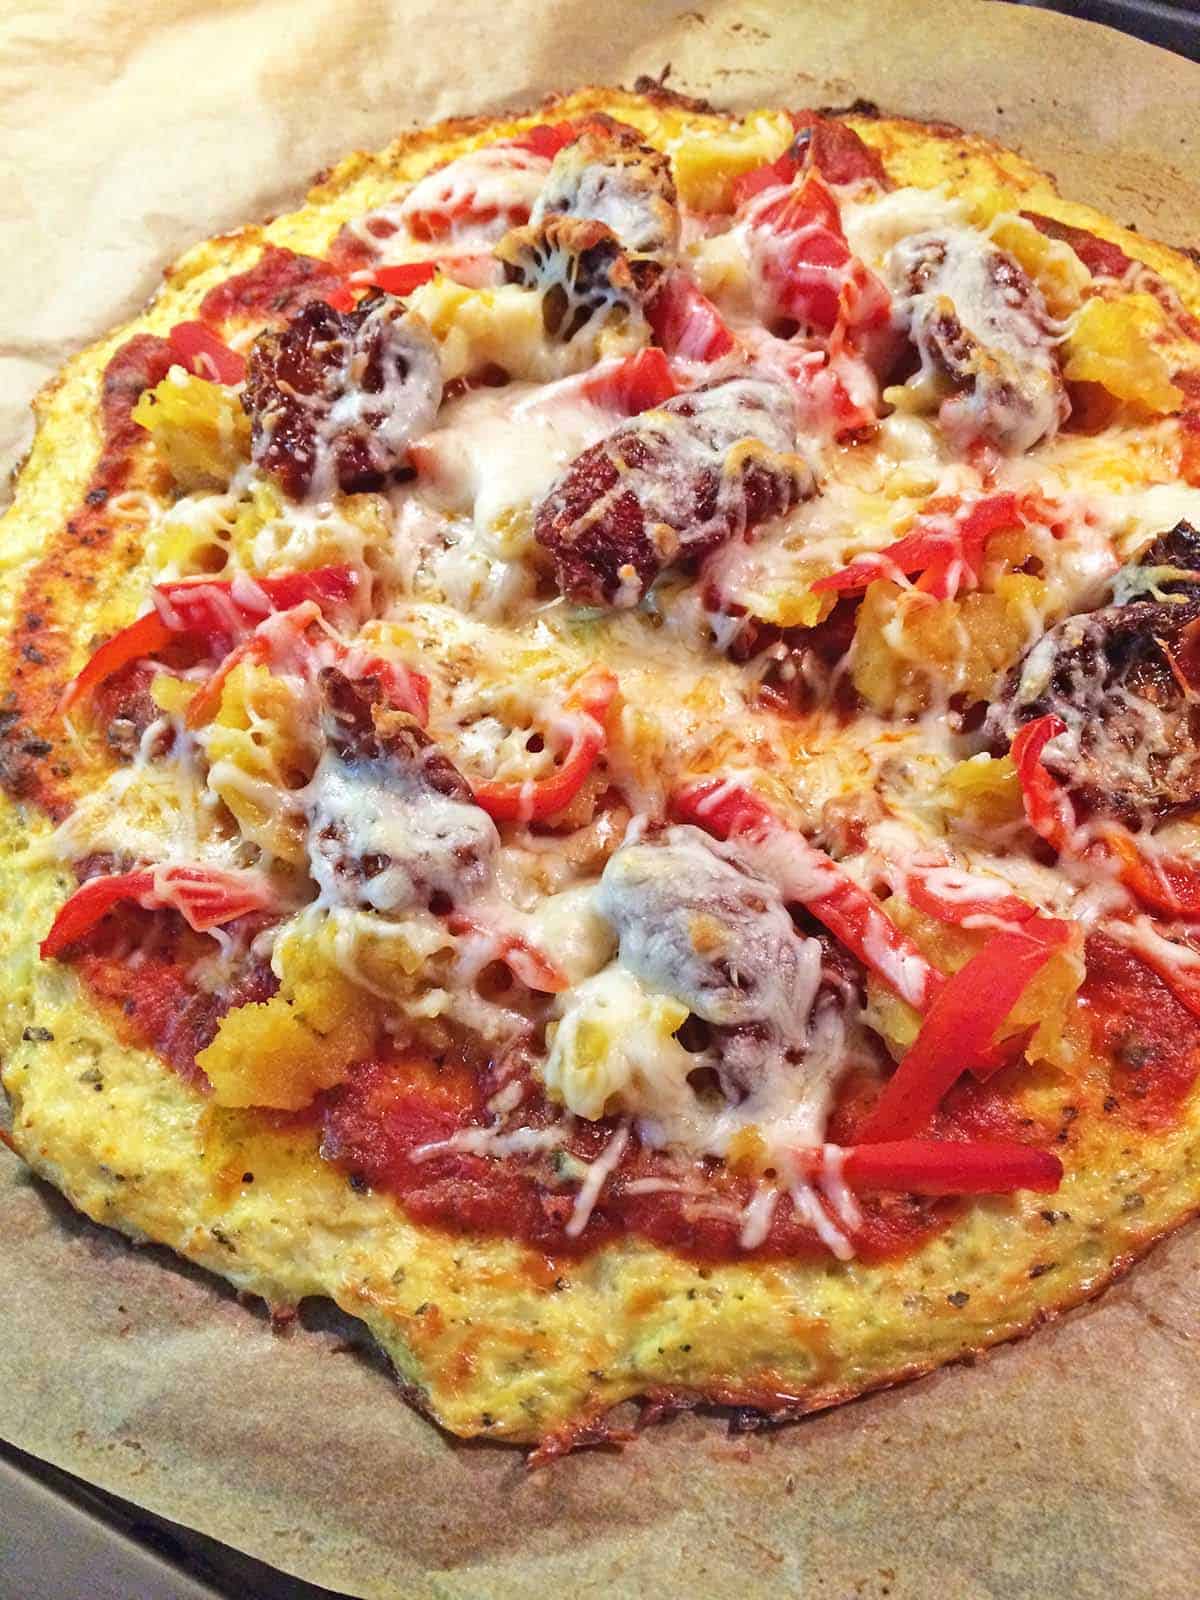 Cauliflower pizza crust with toppings